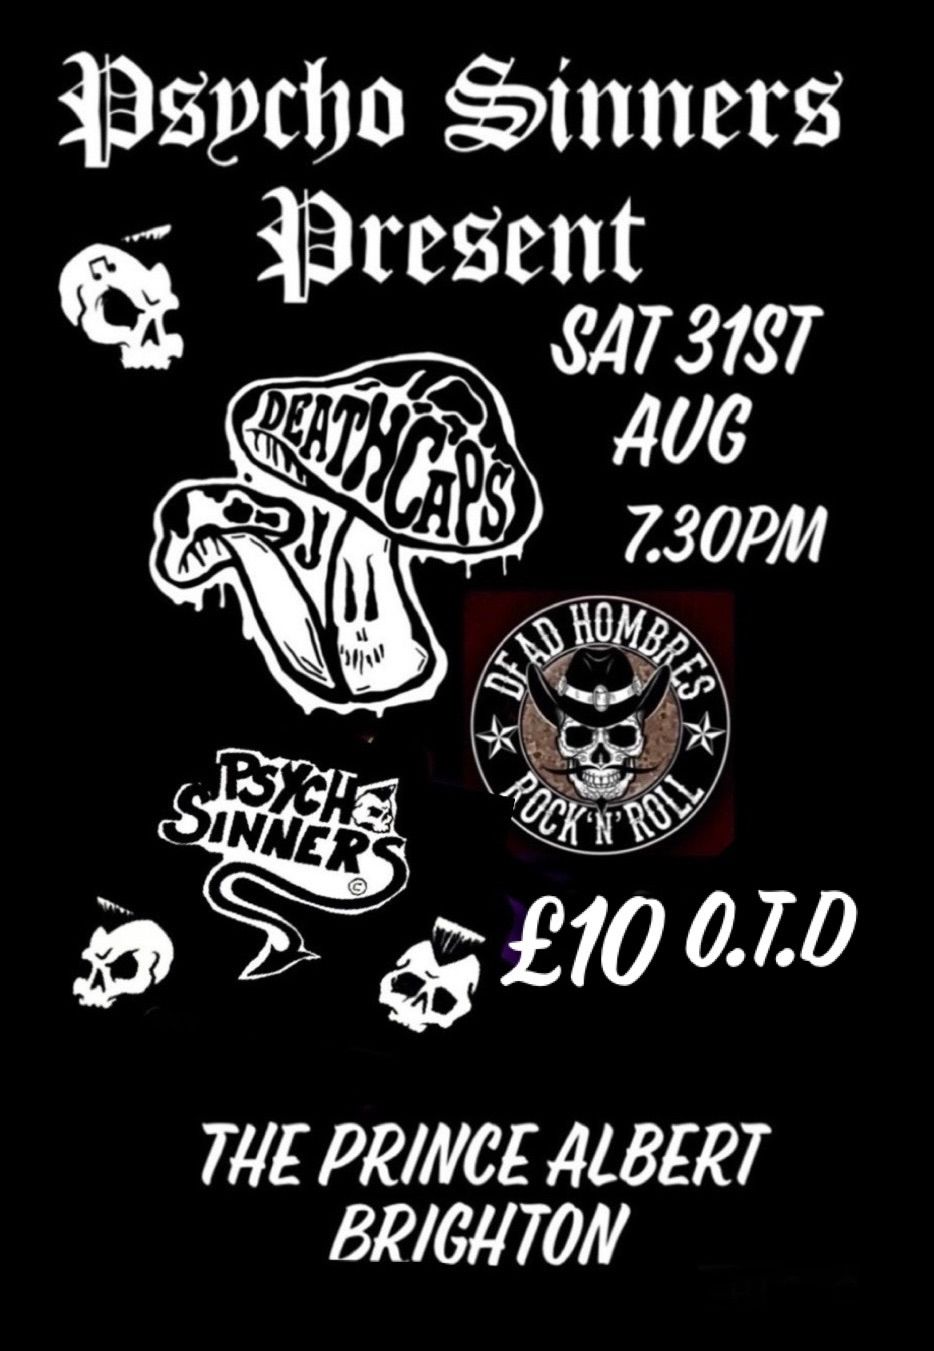 Psycho Sinners at The Prince Albert Present 